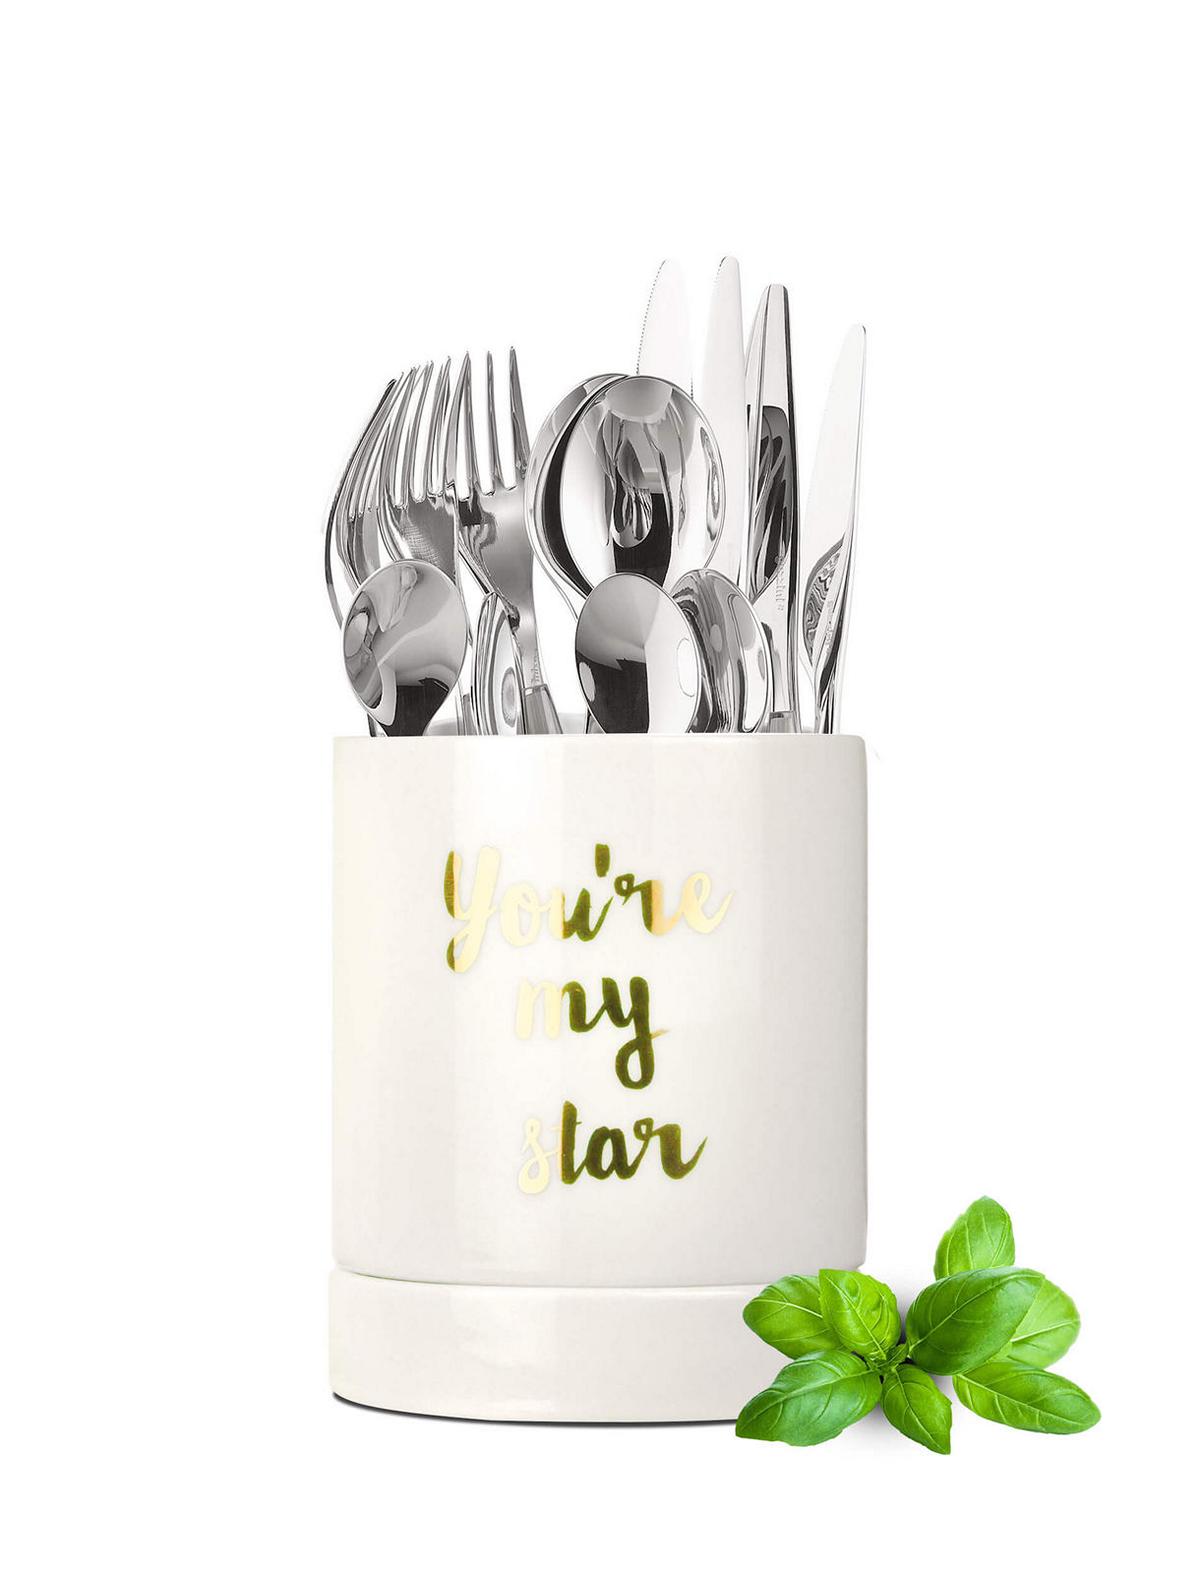 Cutlery holder with drainer made of porcelain cutlery basket cutlery container cutlery drainer cutlery stand drainer